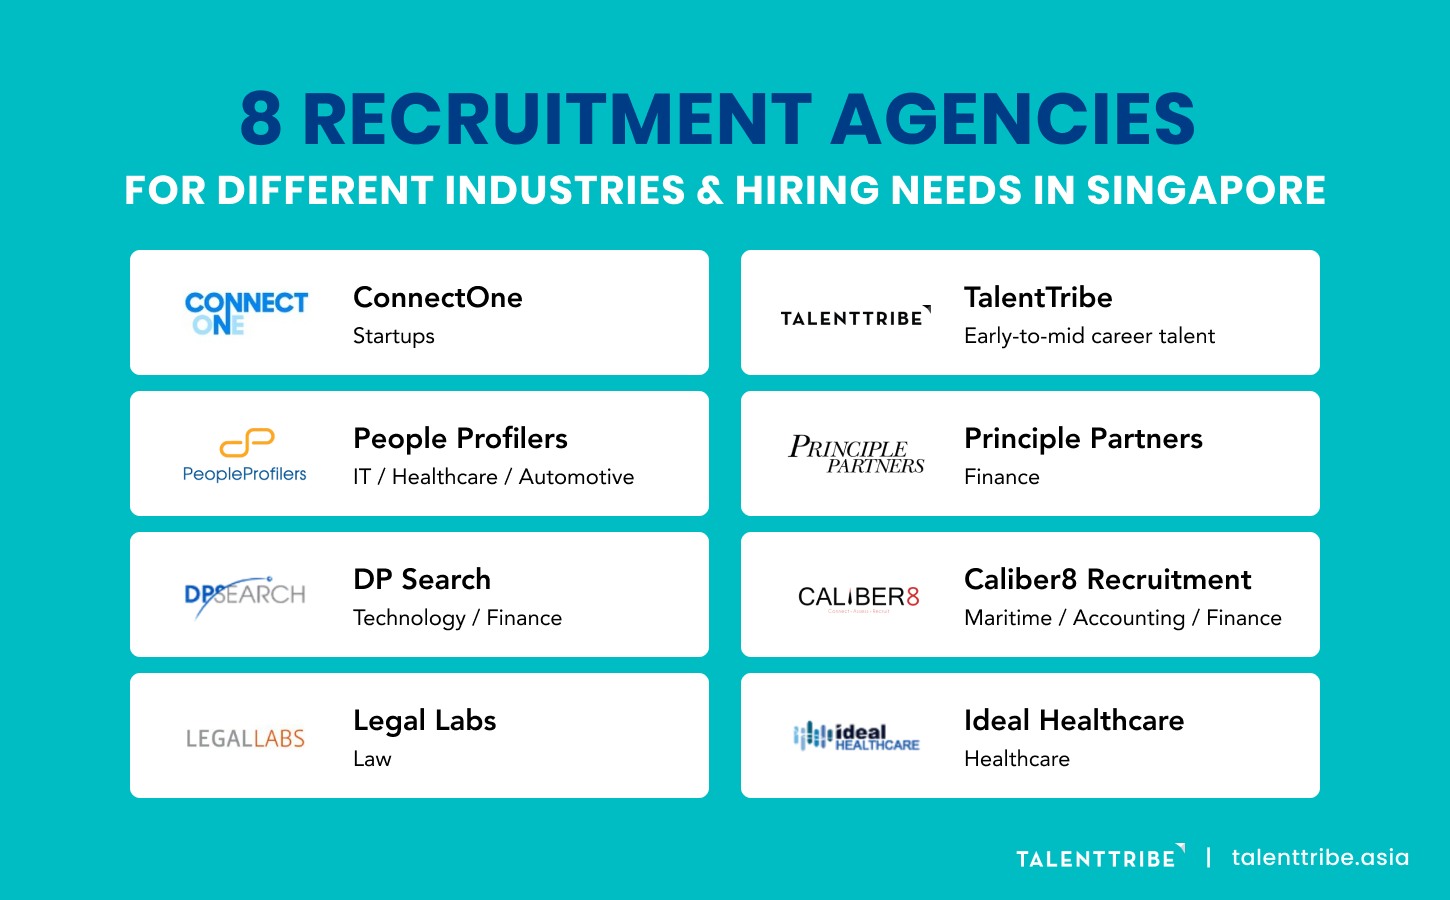 Do you currently use a recruitment agency in Singapore for your hiring?